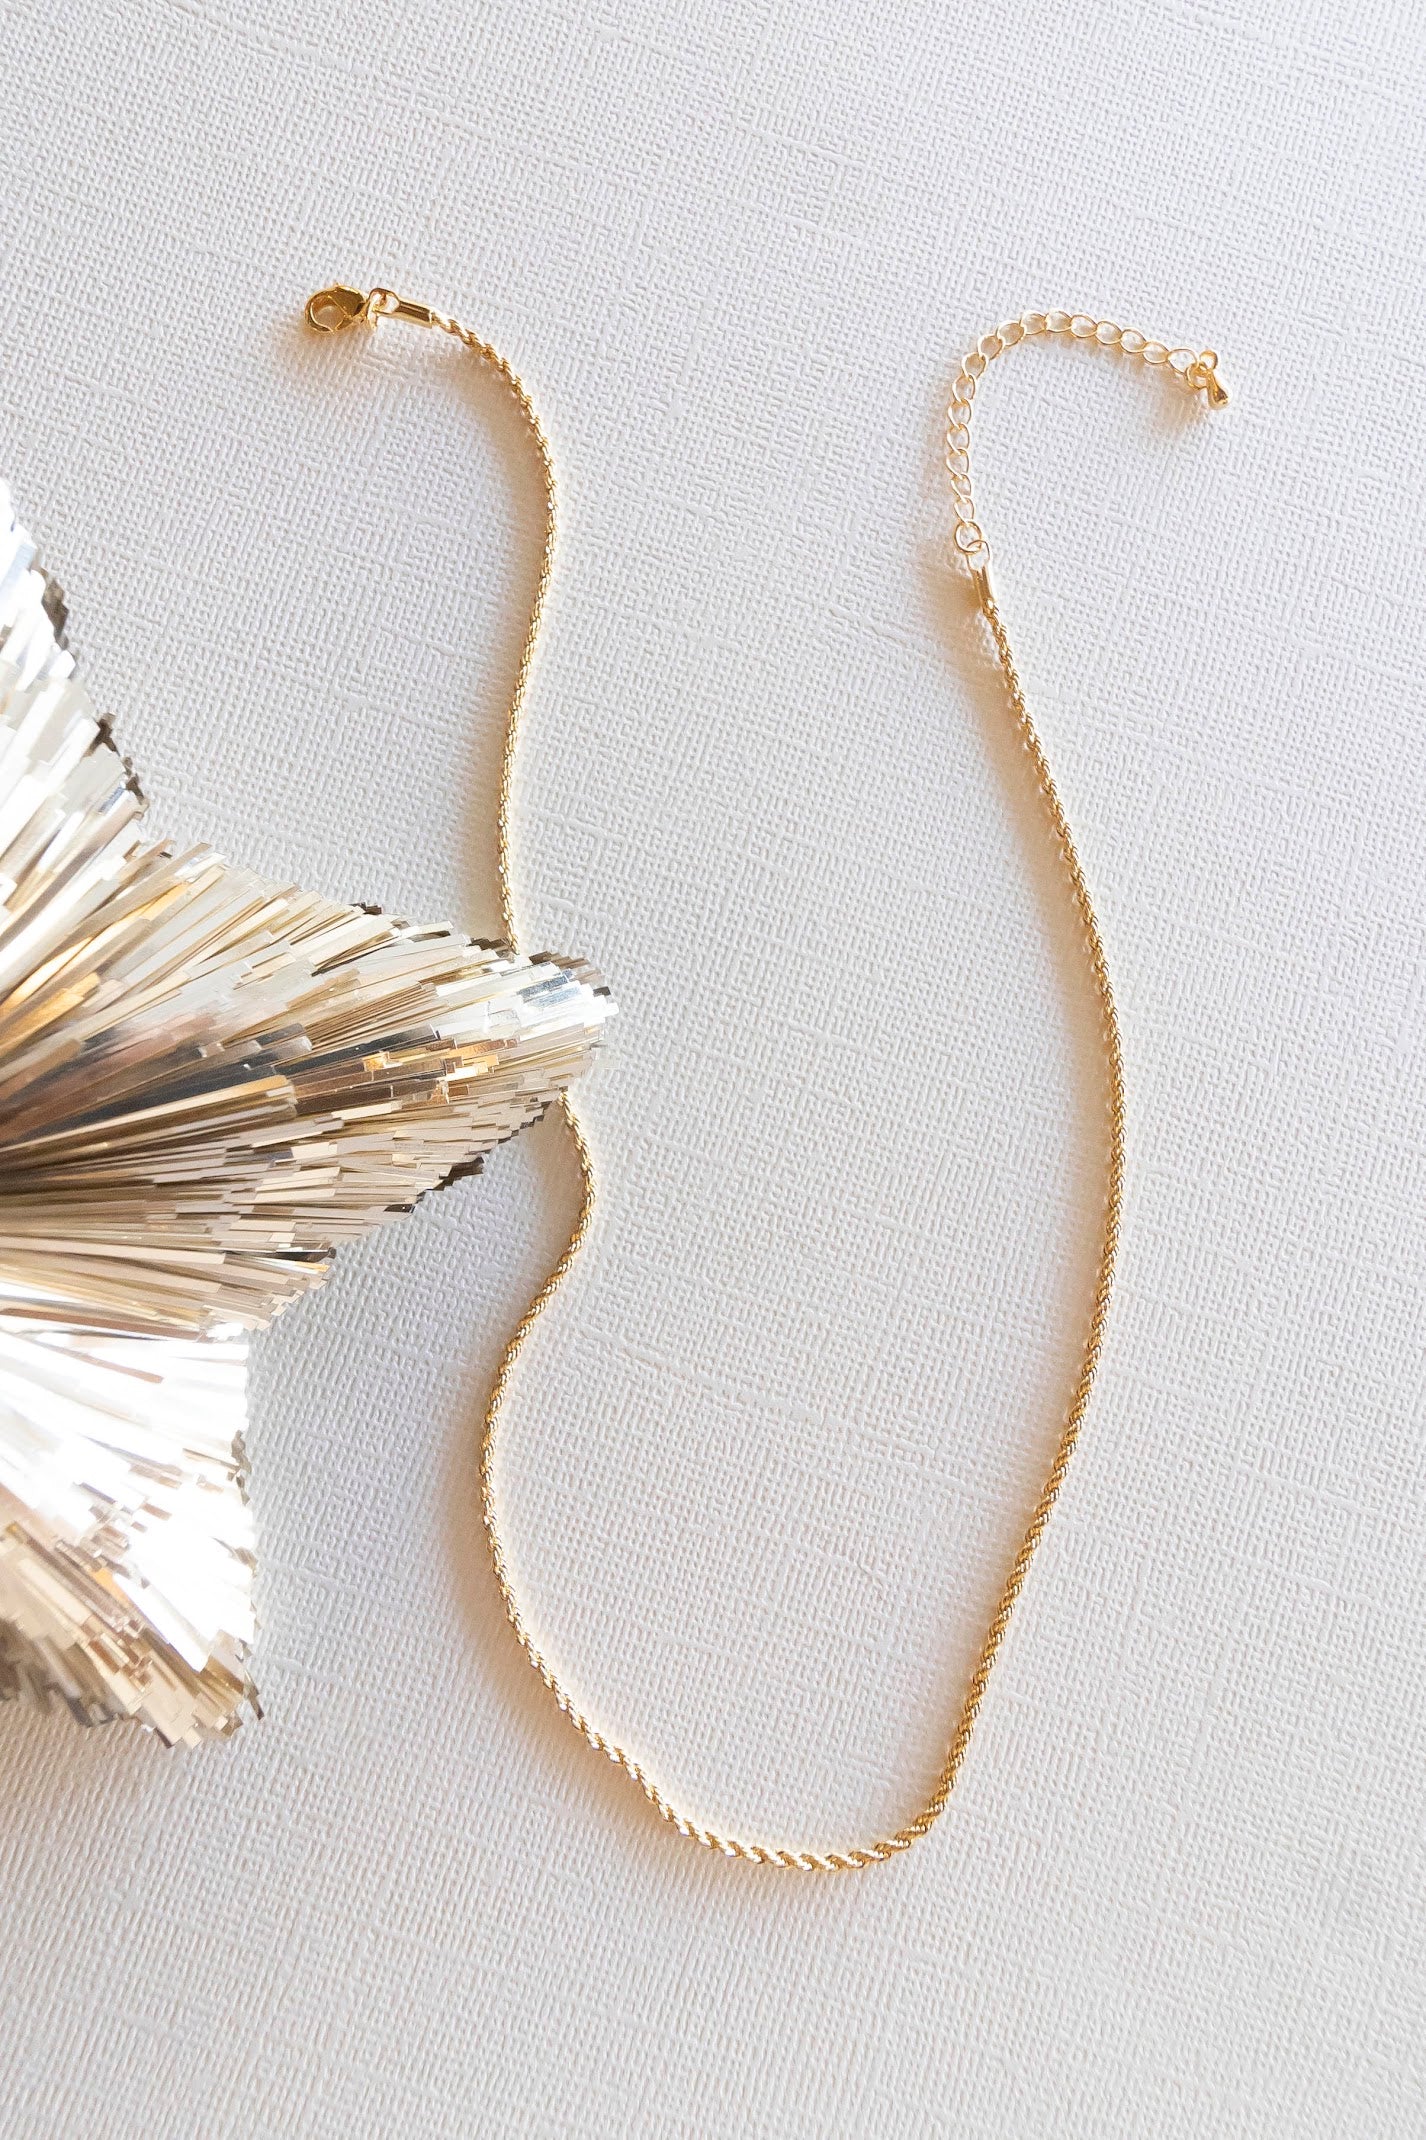 Load image into Gallery viewer, Eva Dainty Twist Necklace | Single Strand Gold Necklace | Twist Chain Necklace | Minimalist Layering Accessories
